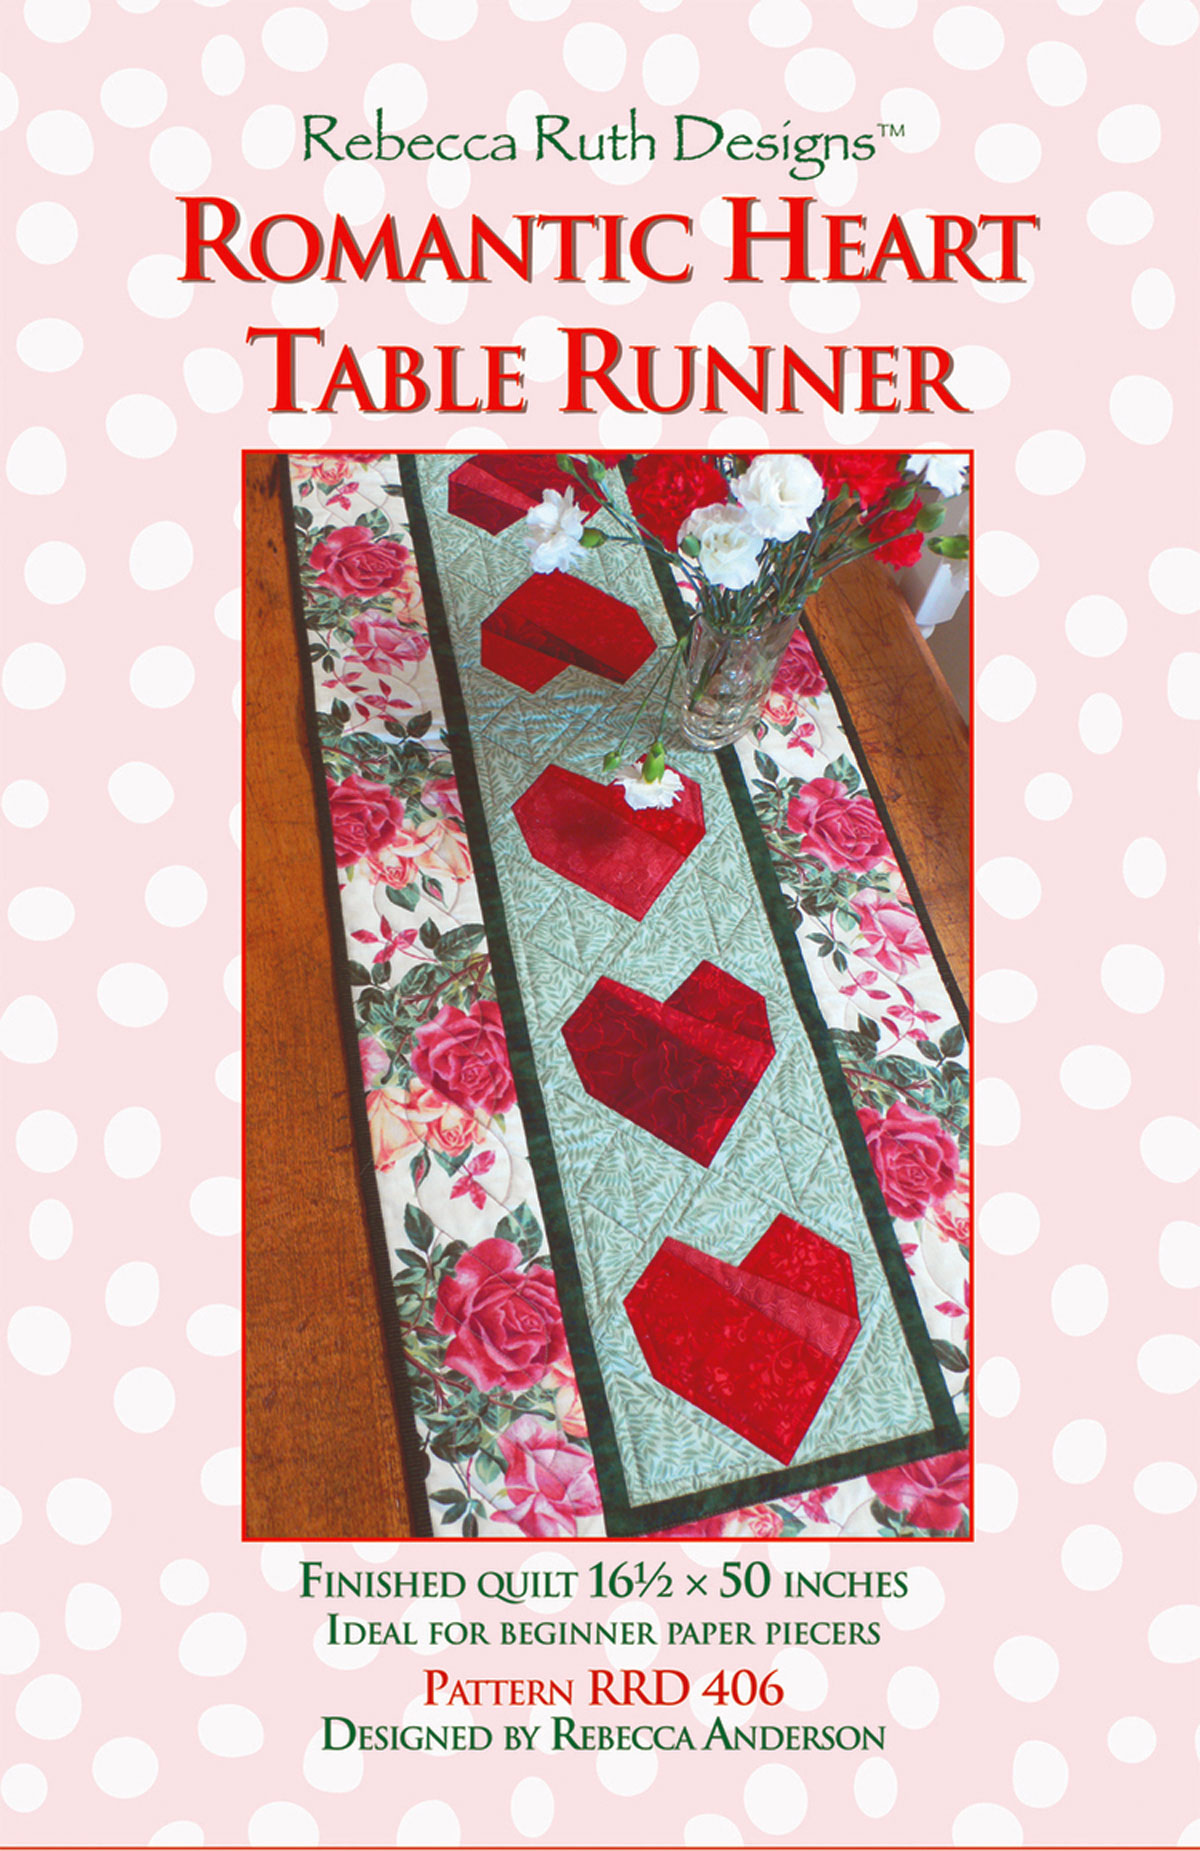 Romantic-Heart-table-runner-sewing-pattern-rebecca-ruth-designs-front